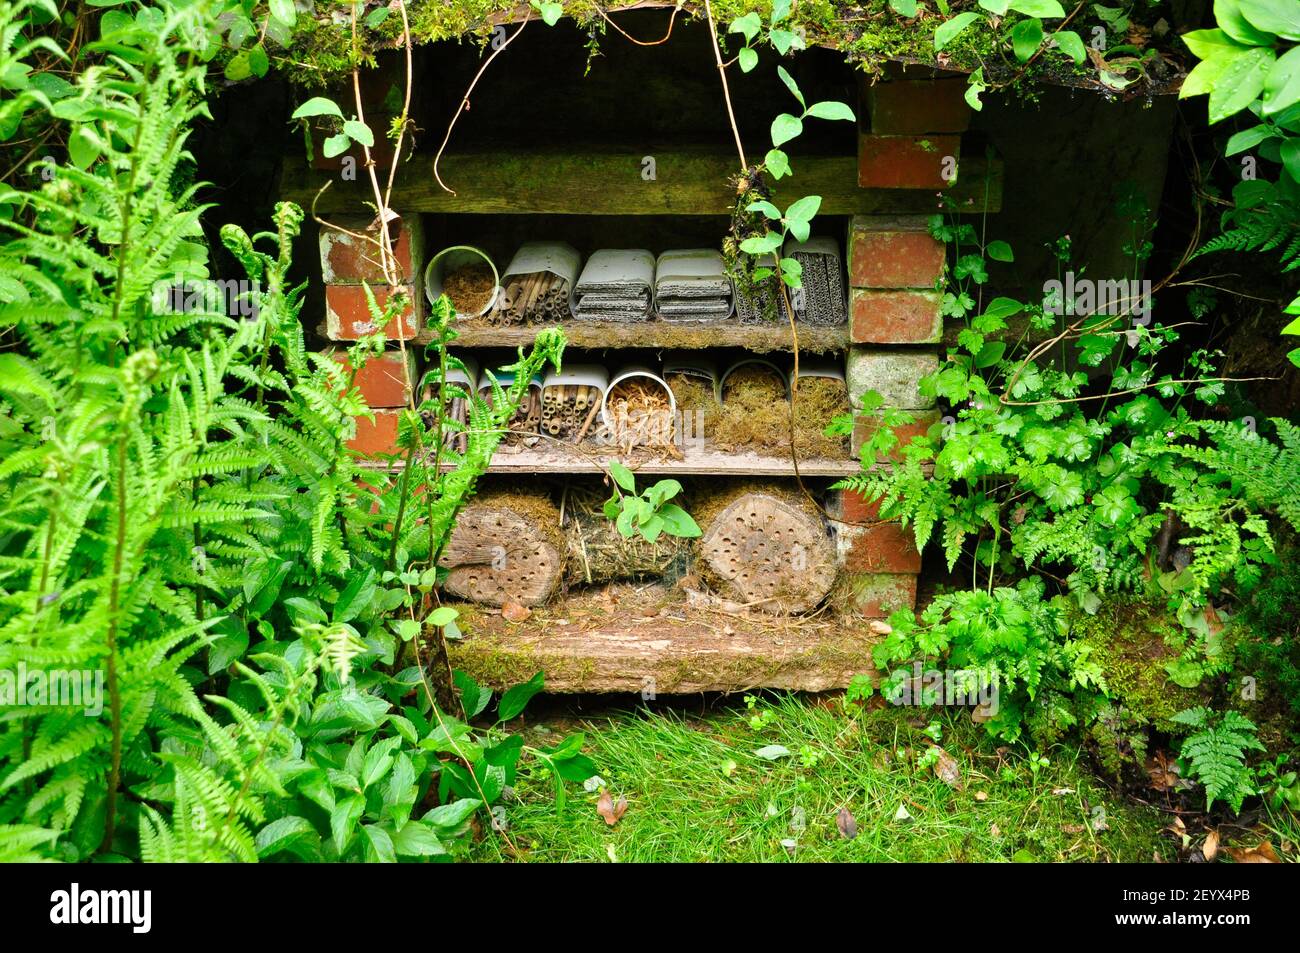 A well stocked insect hotel with a variety of habitats in a green quiet cornerof a Somerset garden. Stock Photo